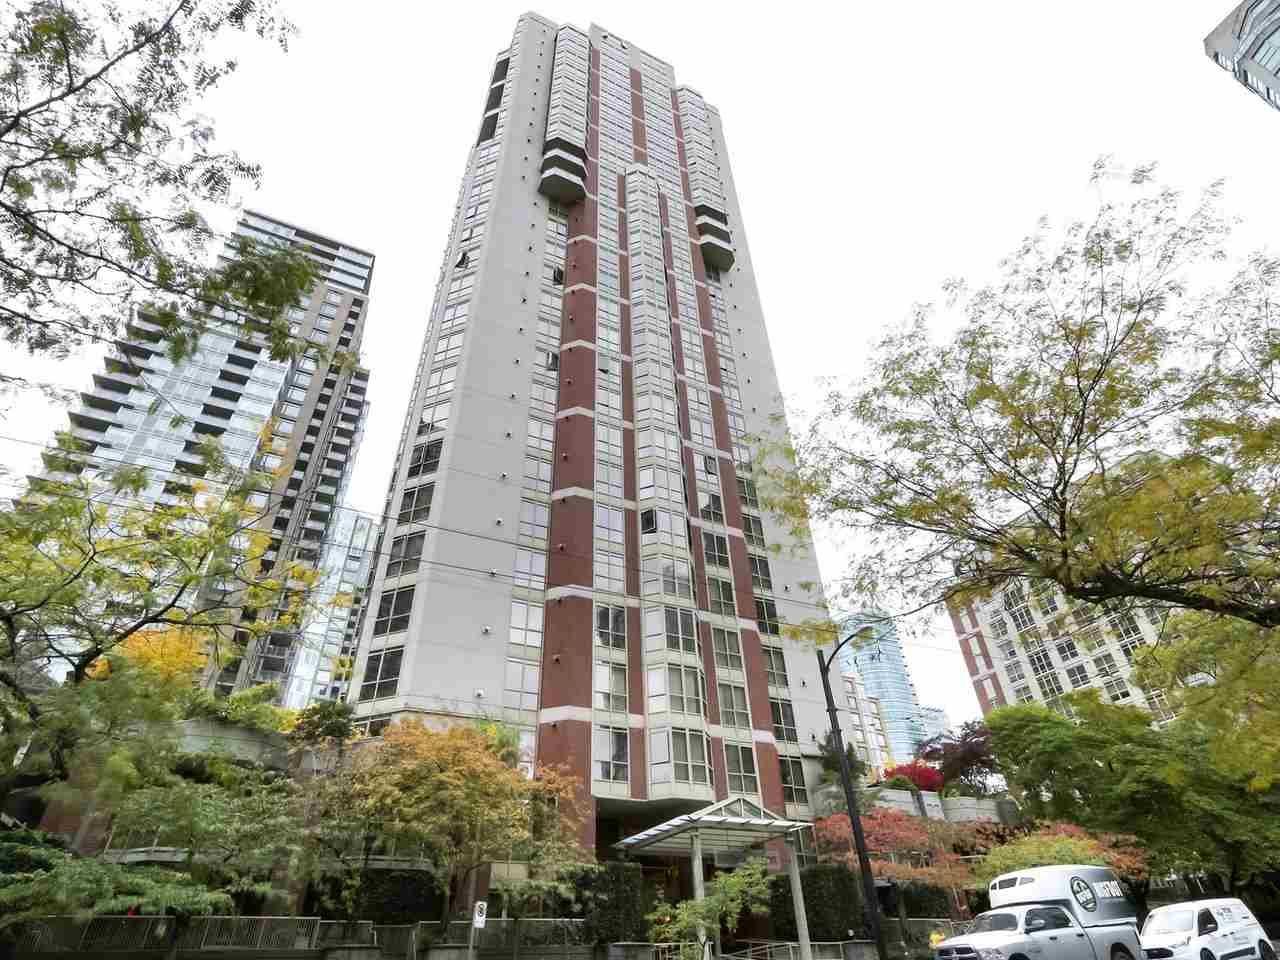 Main Photo: 1103 867 HAMILTON STREET in Vancouver: Downtown VW Condo for sale (Vancouver West)  : MLS®# R2413124